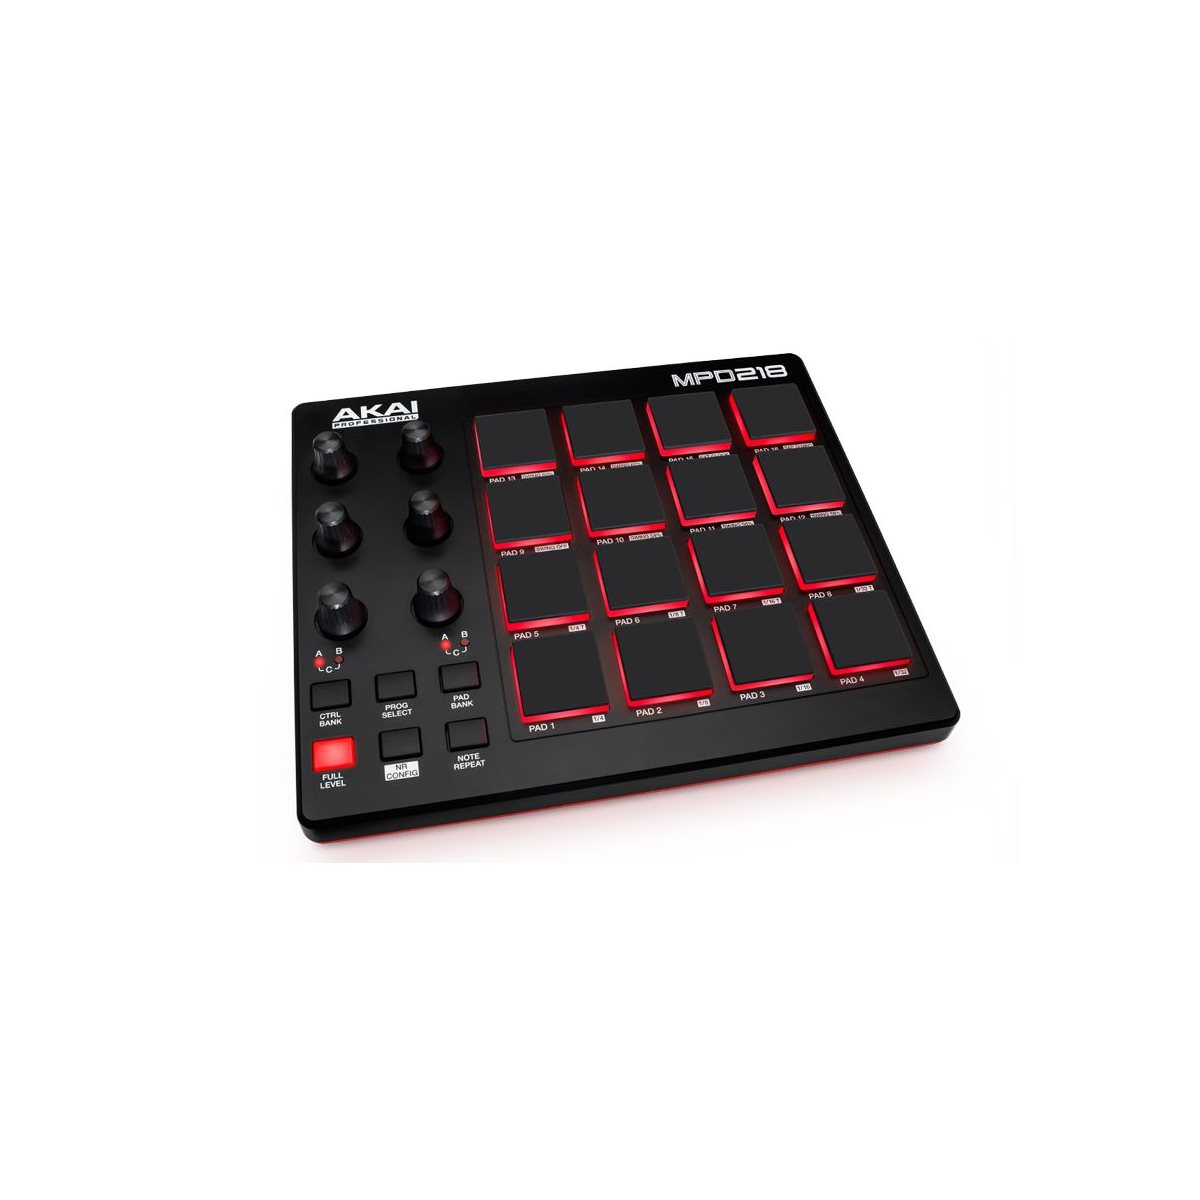 AKAI - MPD218 - Highly Playable Pad Controller